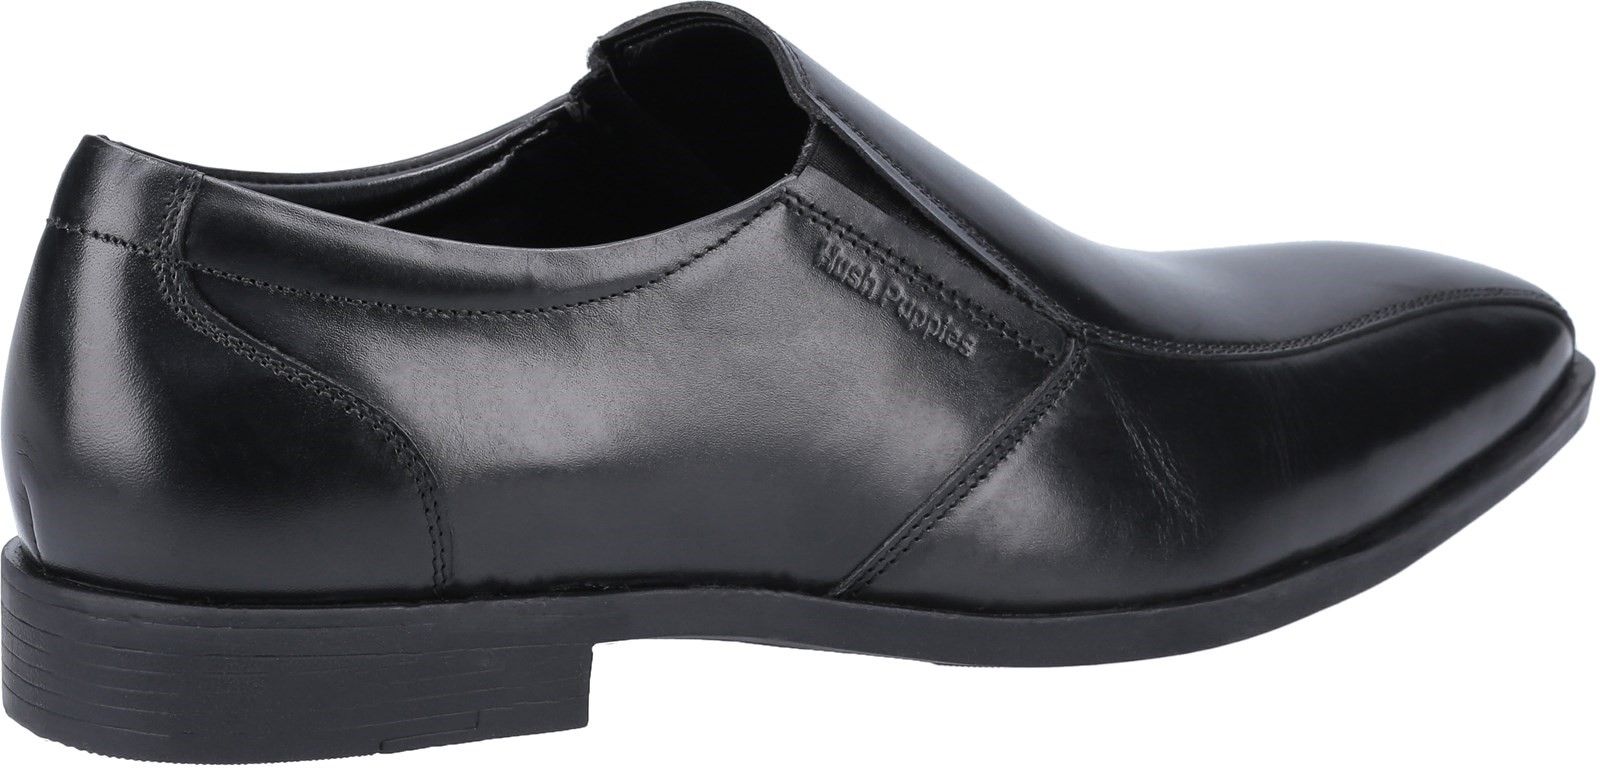 Ellis slip on shoe from Hush Puppies; Ellis is crafted with leather and has a memory foam footbed. The lightweight, flexible sole unit makes this the perfect smart footwear all day.Smart Leather Upper. 
Square toe. 
Hardwearing Rubber outsole. 
Memory Foam Sock. 
Twin Elastic Gussets for easy on and off.